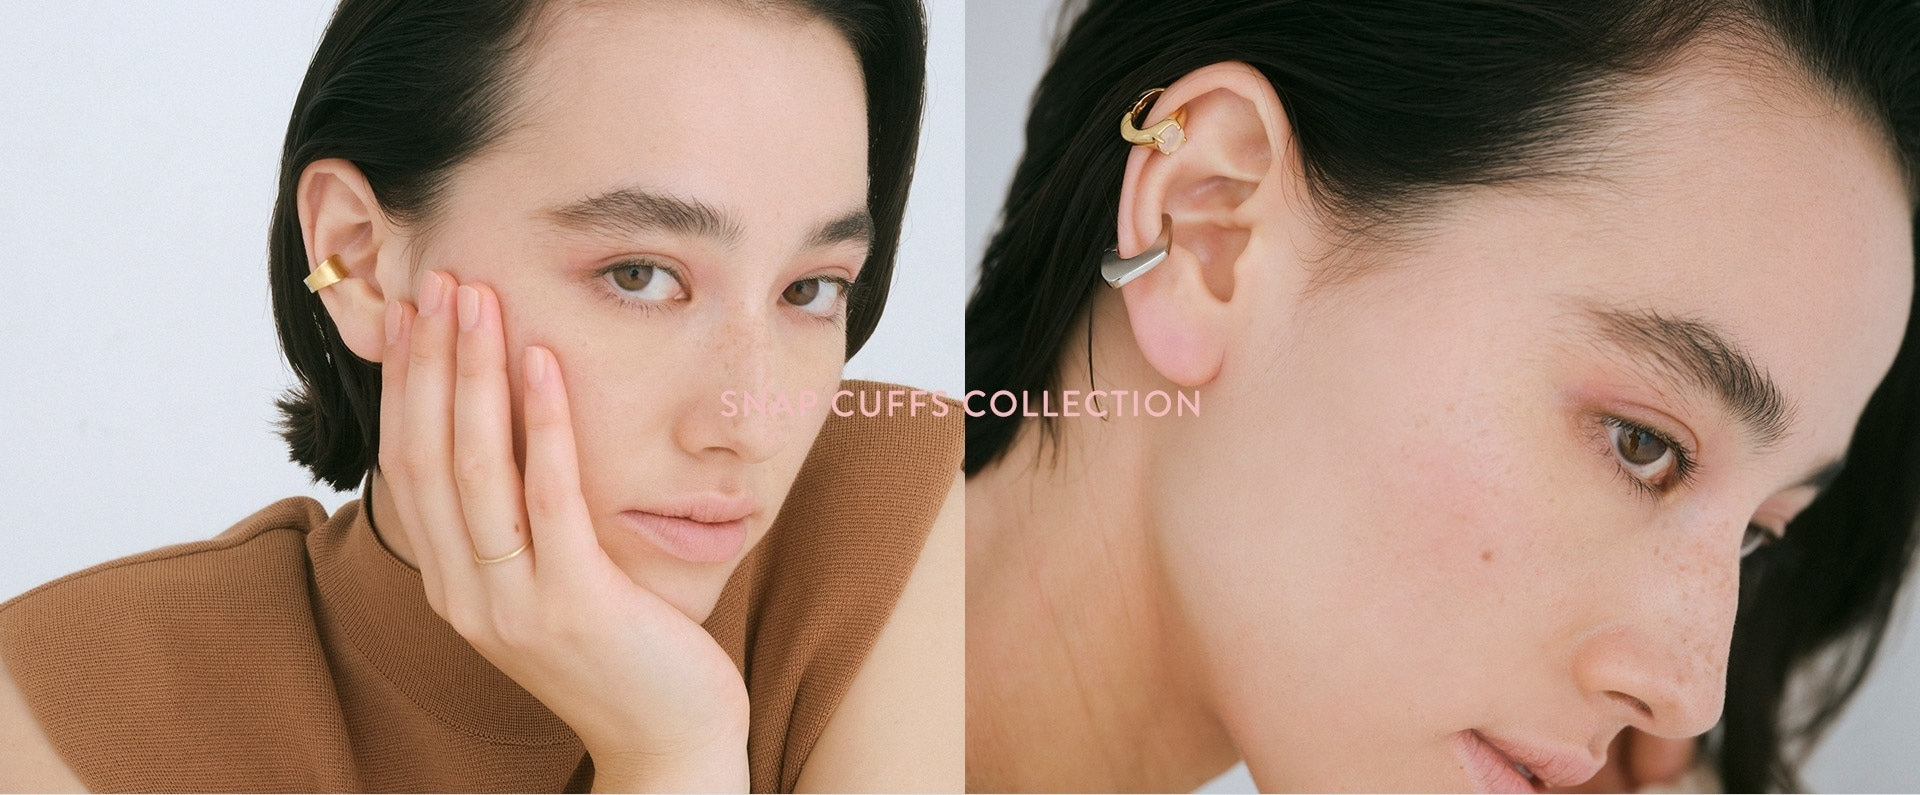 SNAP CUFFS COLLECTION jouete